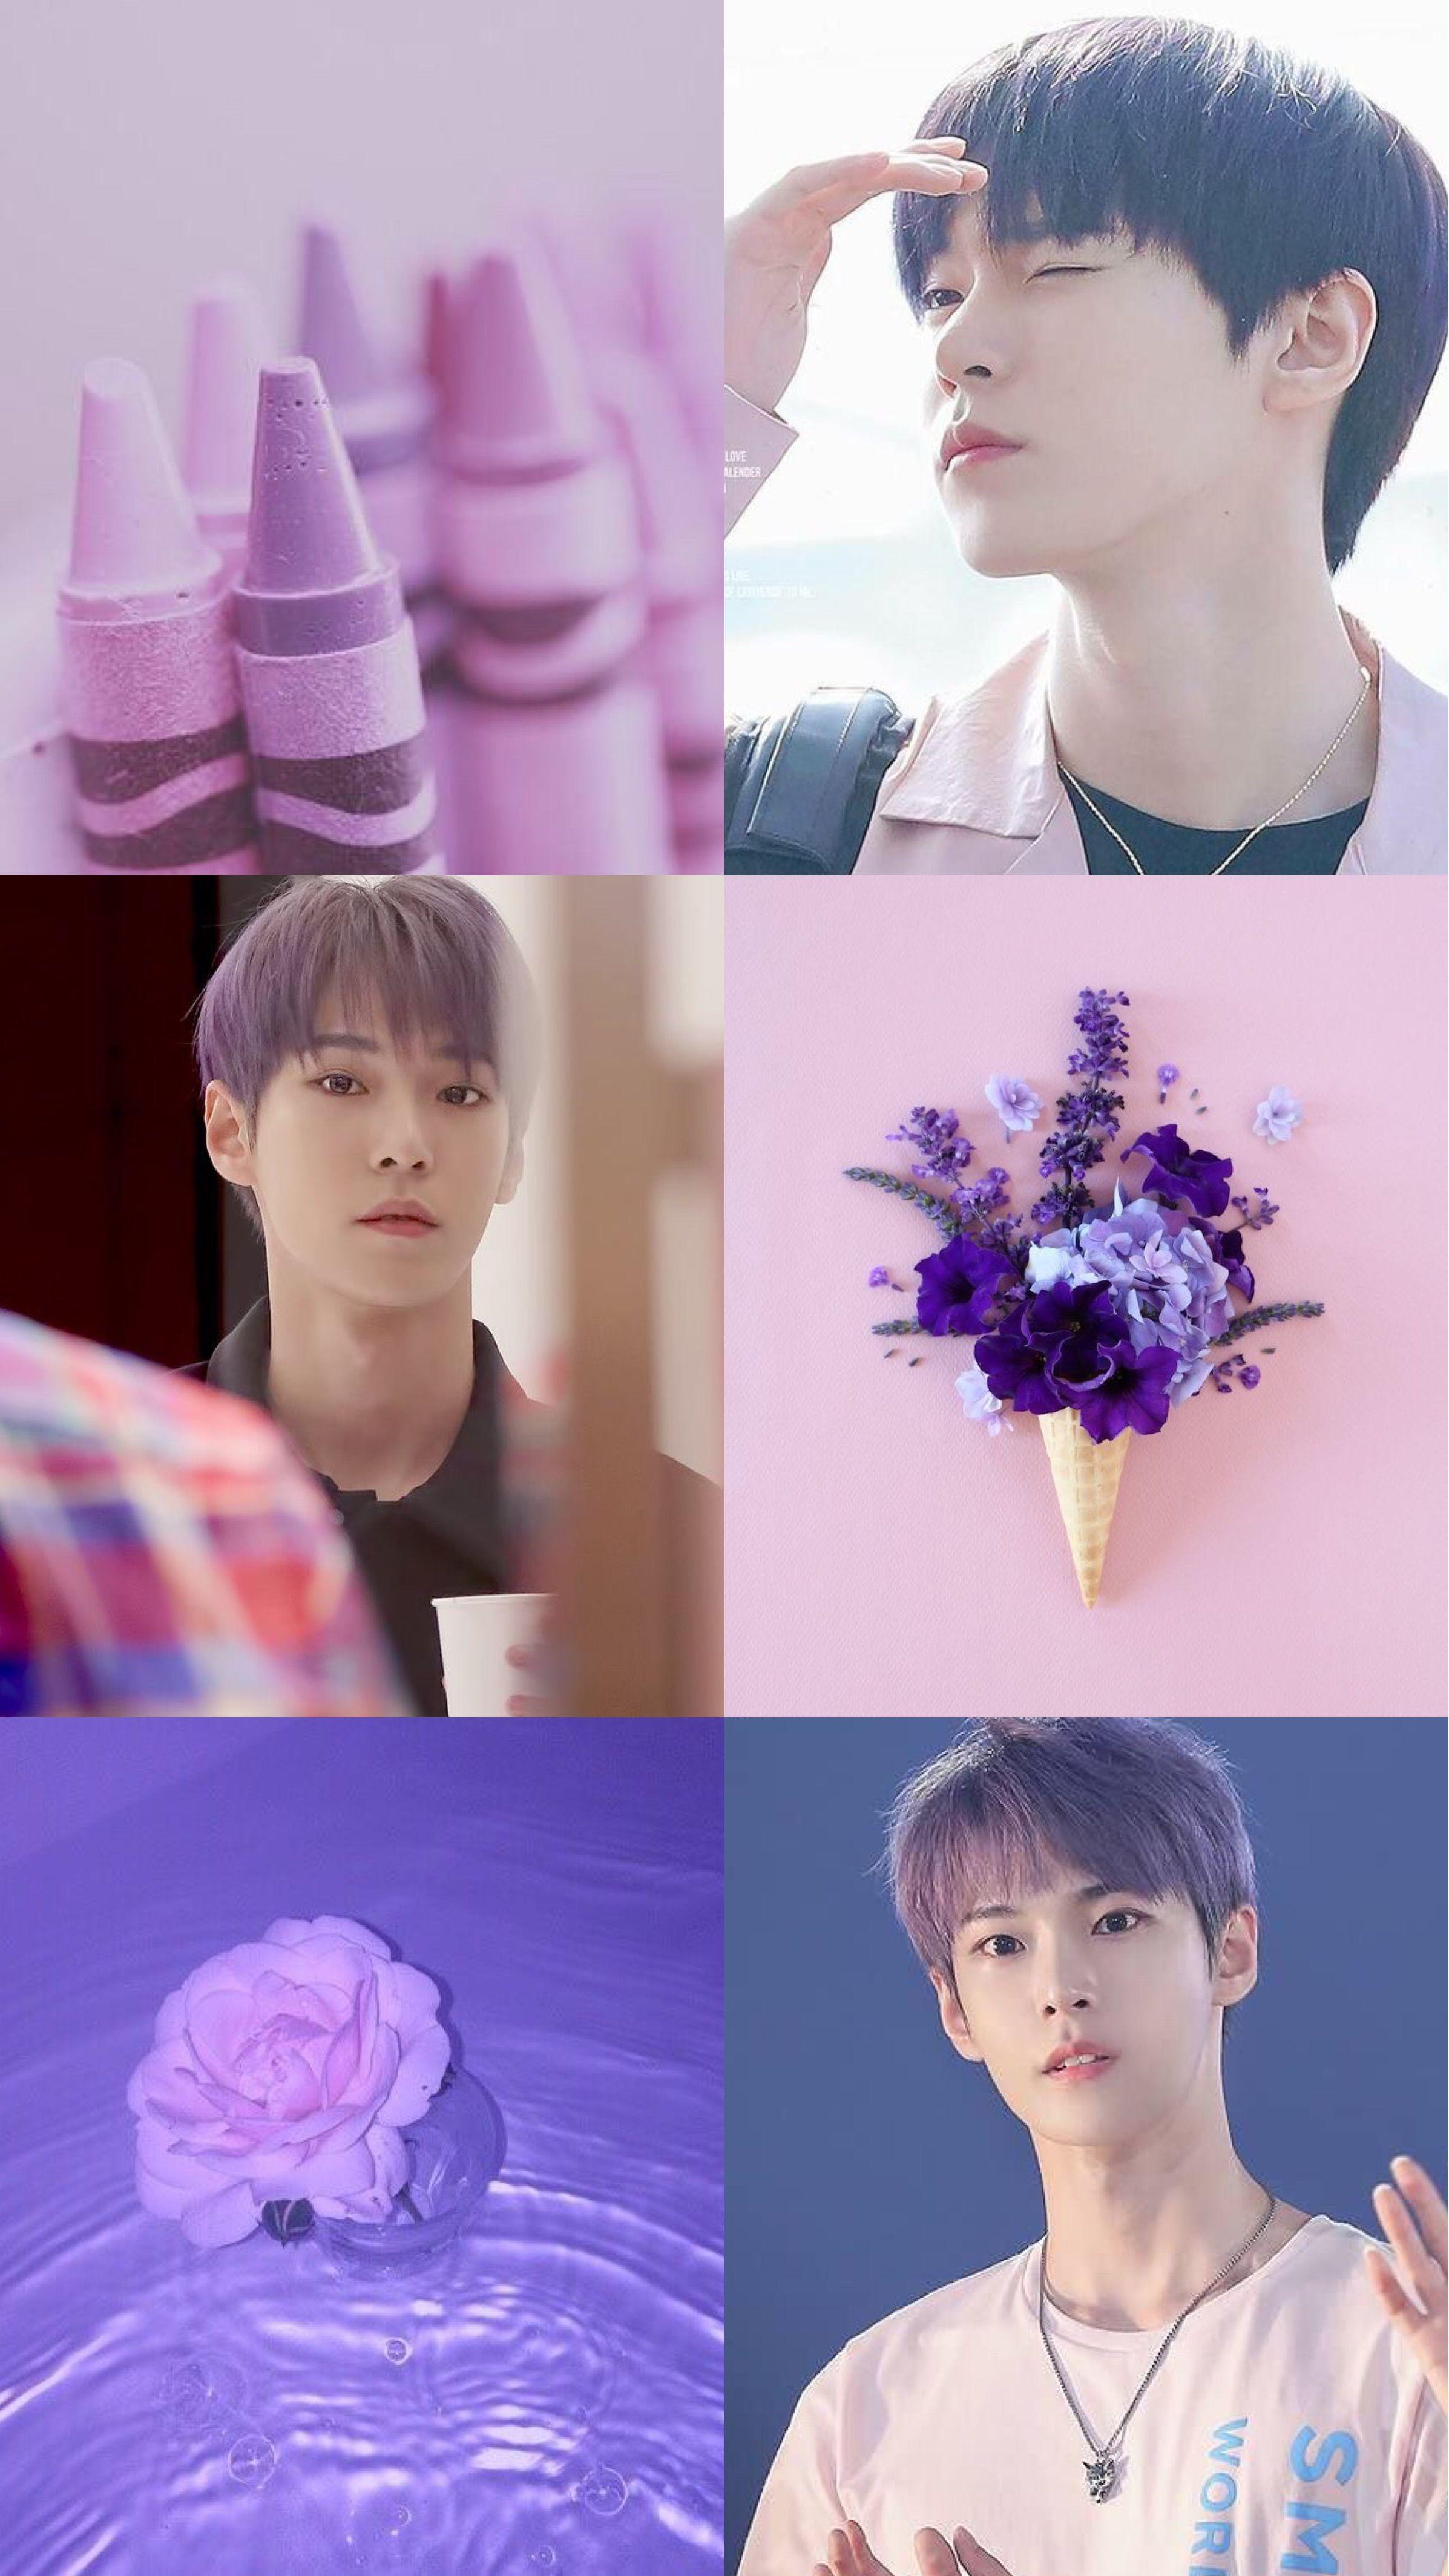 doyoung wallpaper #nct #nctu #nct127. Nct, Nct